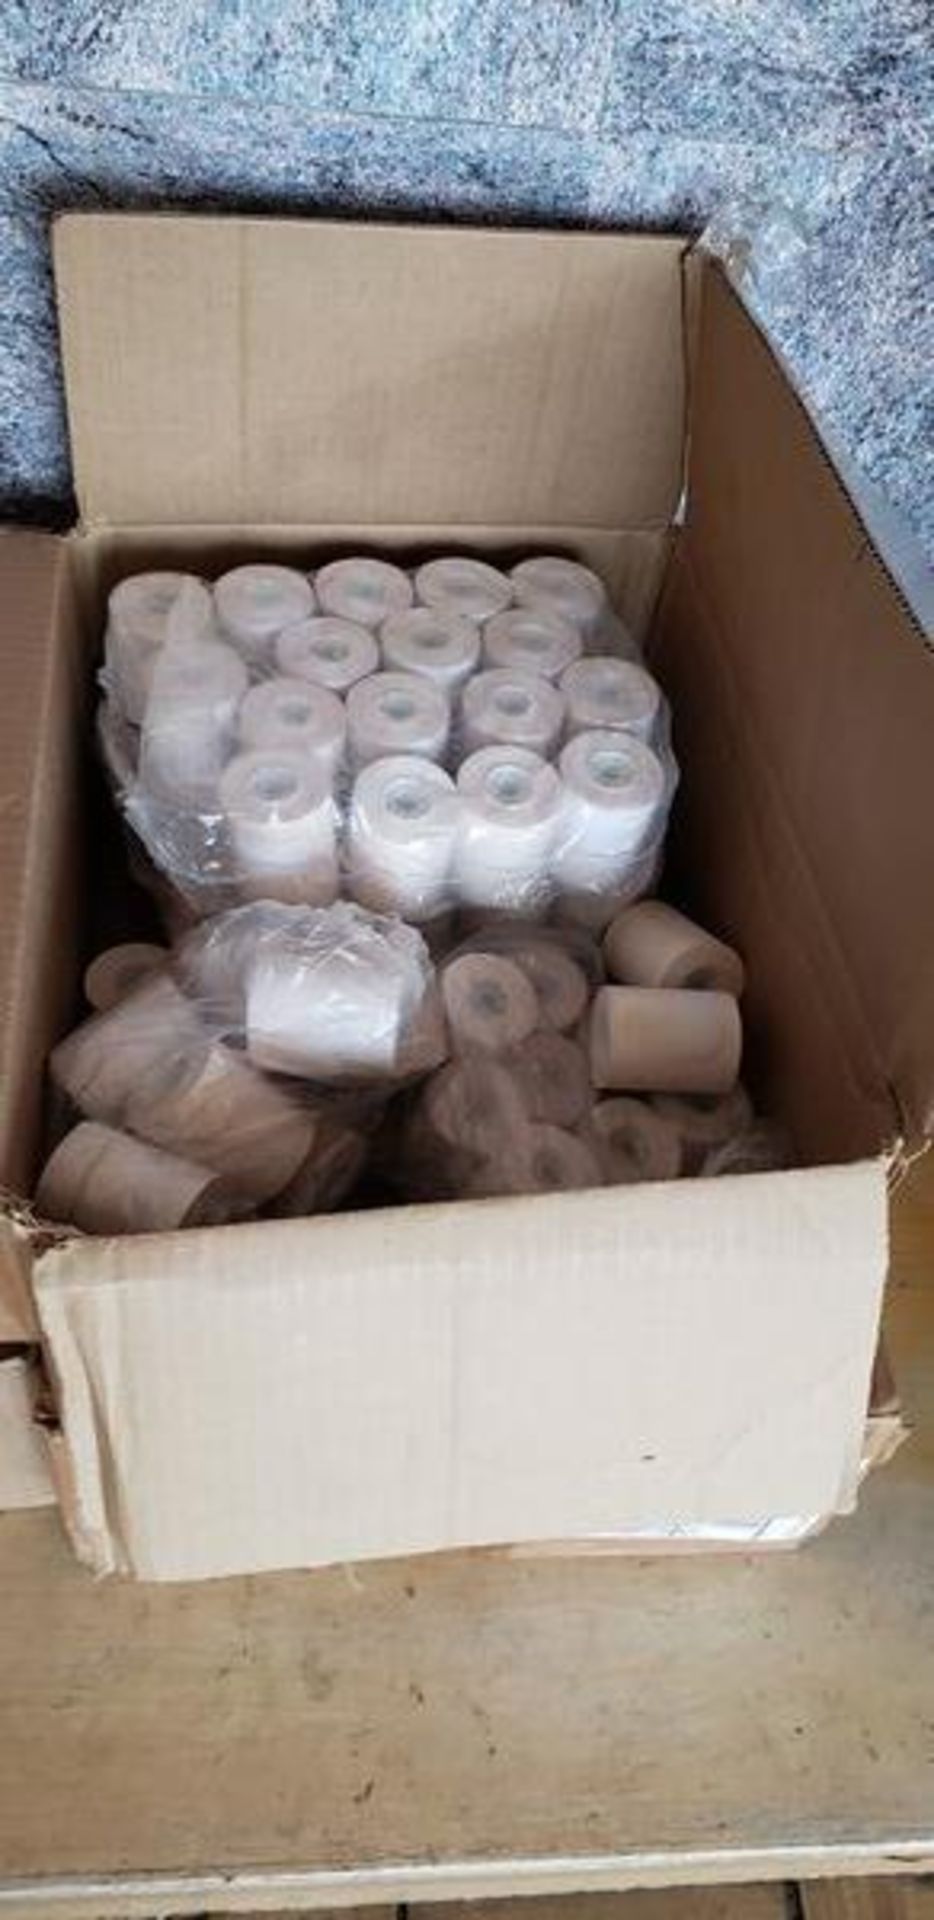 BOXES OF REGISTER ROLLS - Image 3 of 3